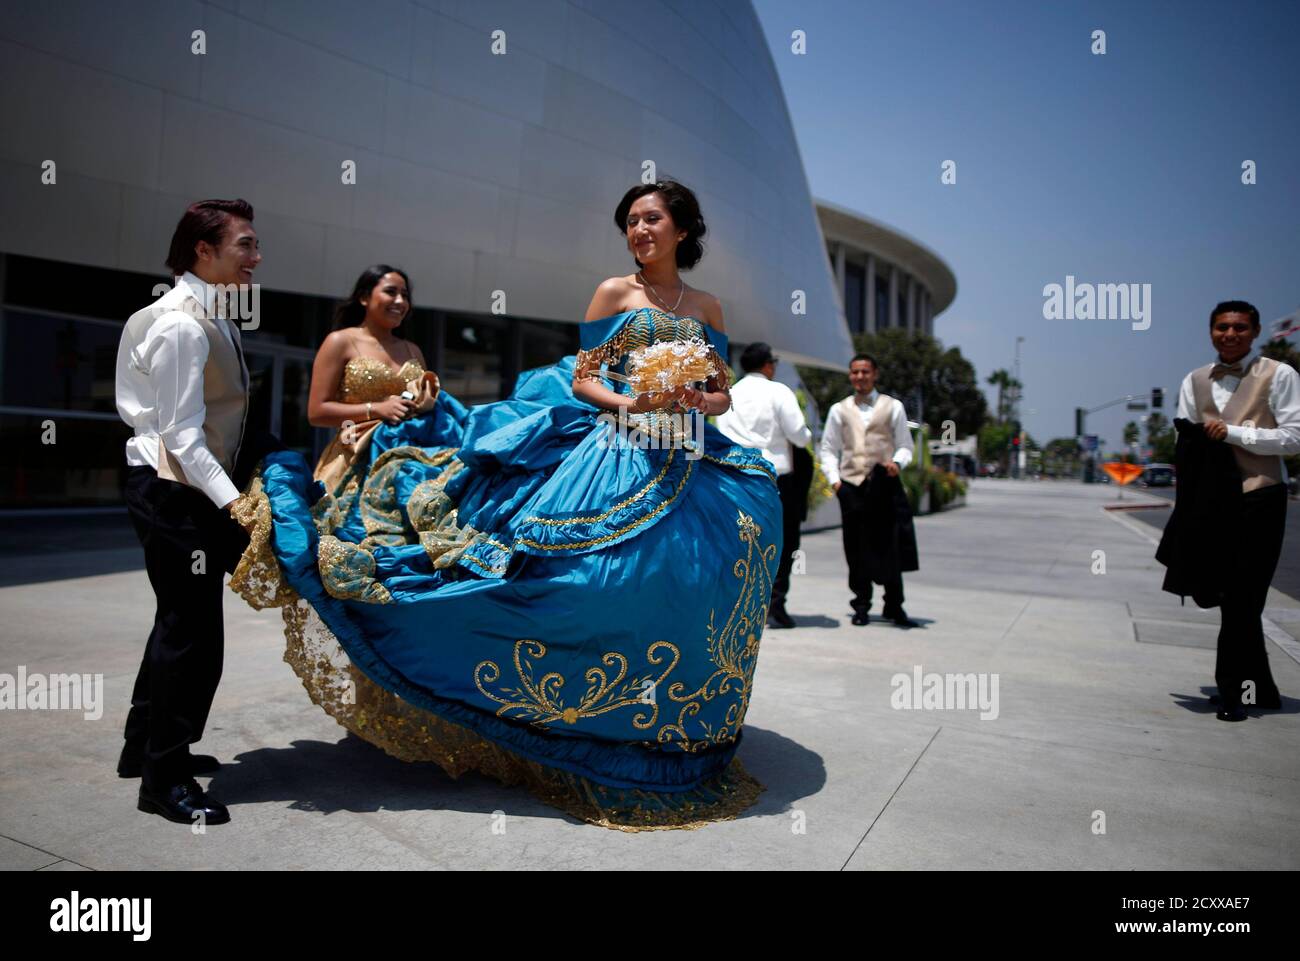 Jocelyn Campos (C), 15, wears her quinceanera dress as she stands with her attendants outside Disney Hall in Los Angeles, California June 25, 2014. Quincea?era is a rite of passage celebrated on the fifteenth birthday of many female Hispanic teenagers. REUTERS/Lucy Nicholson  (UNITED STATES - Tags: SOCIETY) Stock Photo